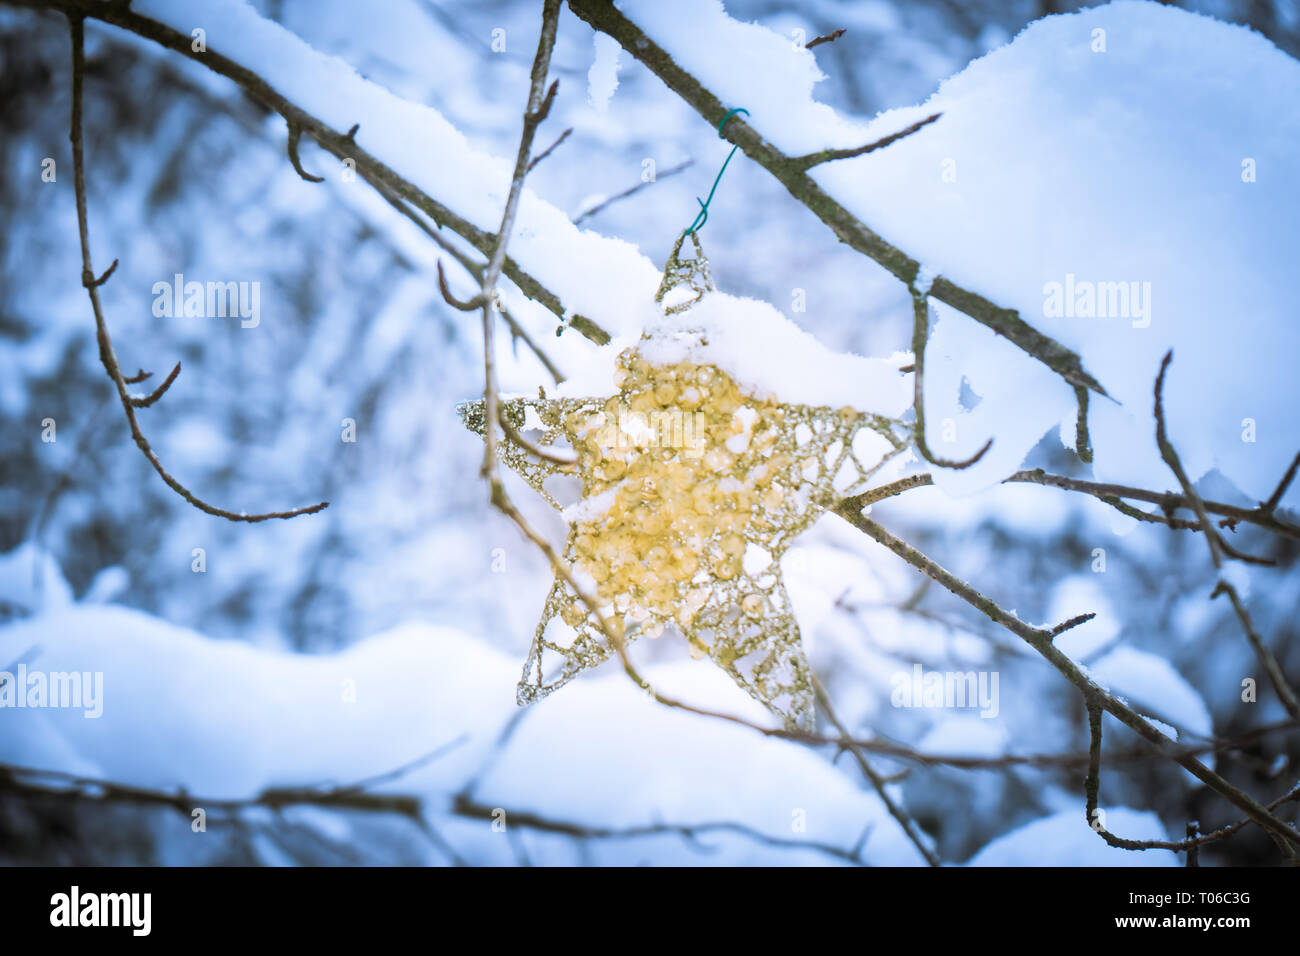 Star shaped Christmas ornament with gold sparkle hanging on a tree in a forest, after snowfall, depicting winter time, Christmas, holidays and winter  Stock Photo